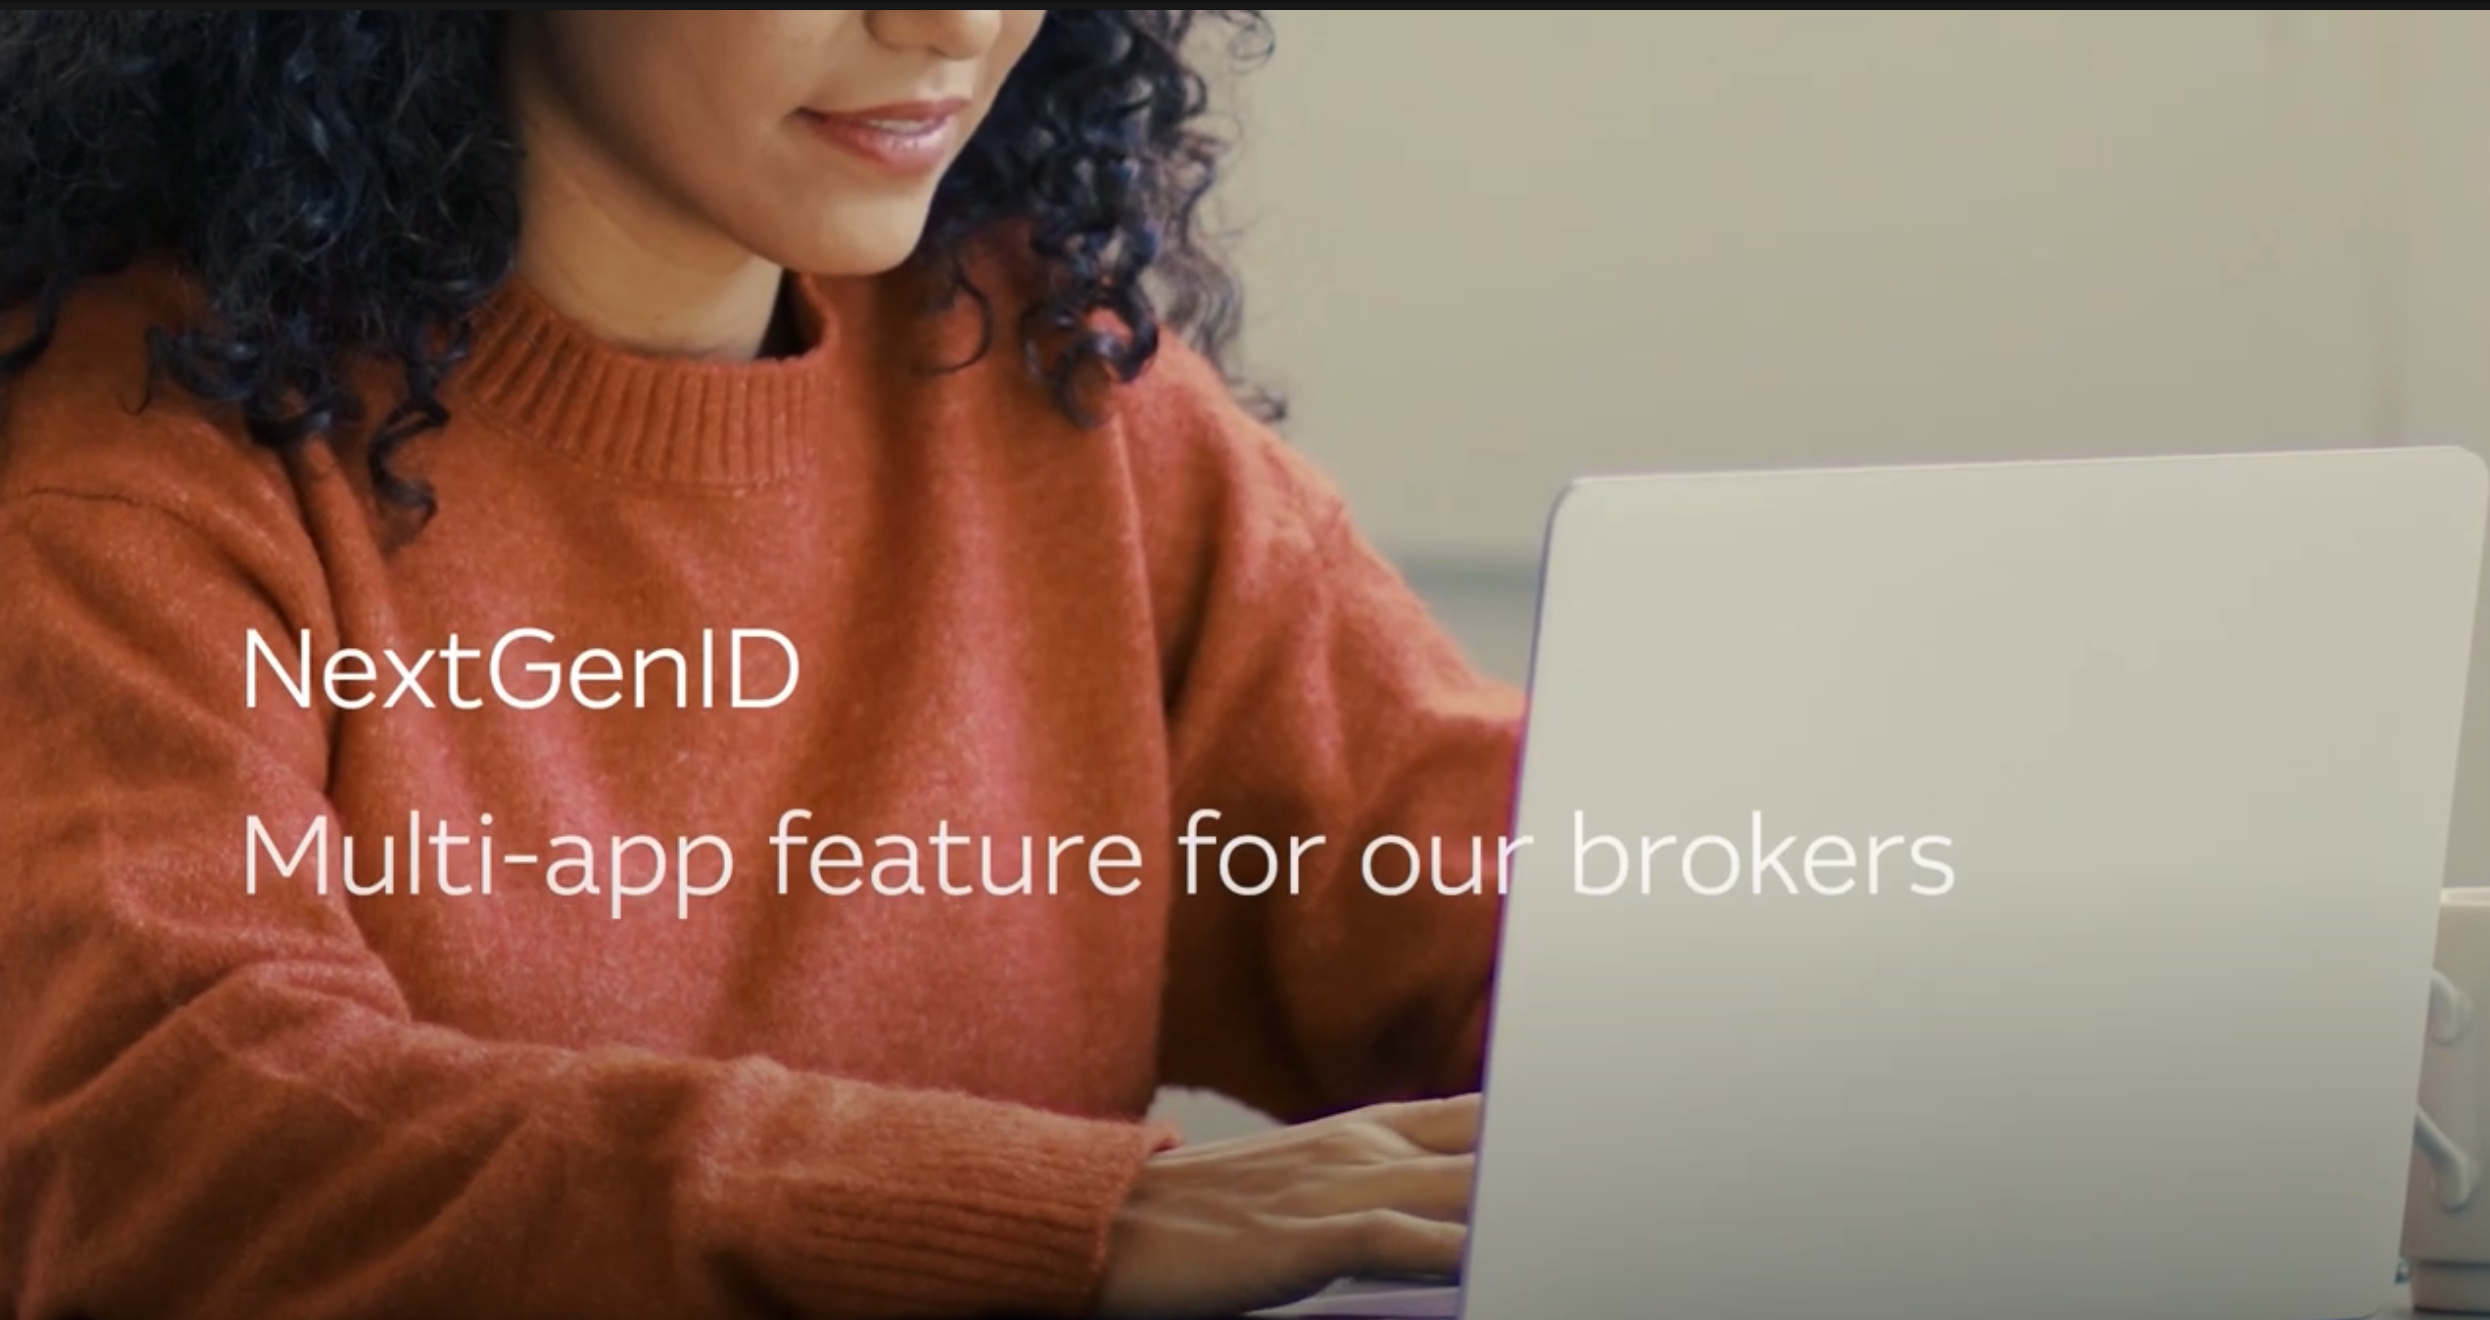 Image of a woman looking at a laptop with the overlay text 'NextGENID, Multi-app feature for brokers'.